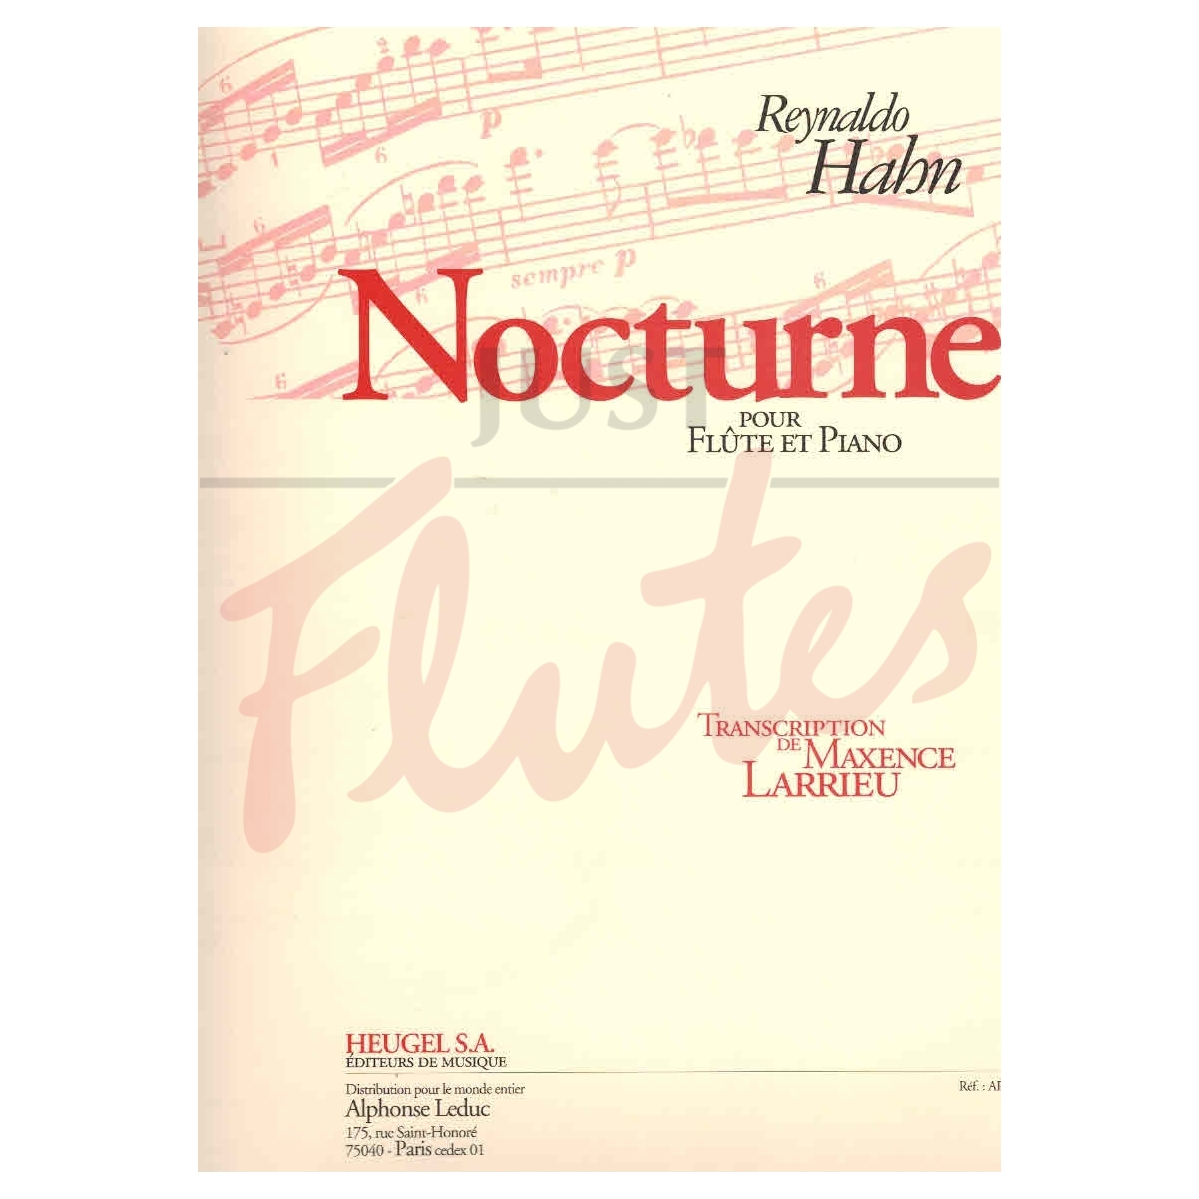 Nocturne for Flute and Piano